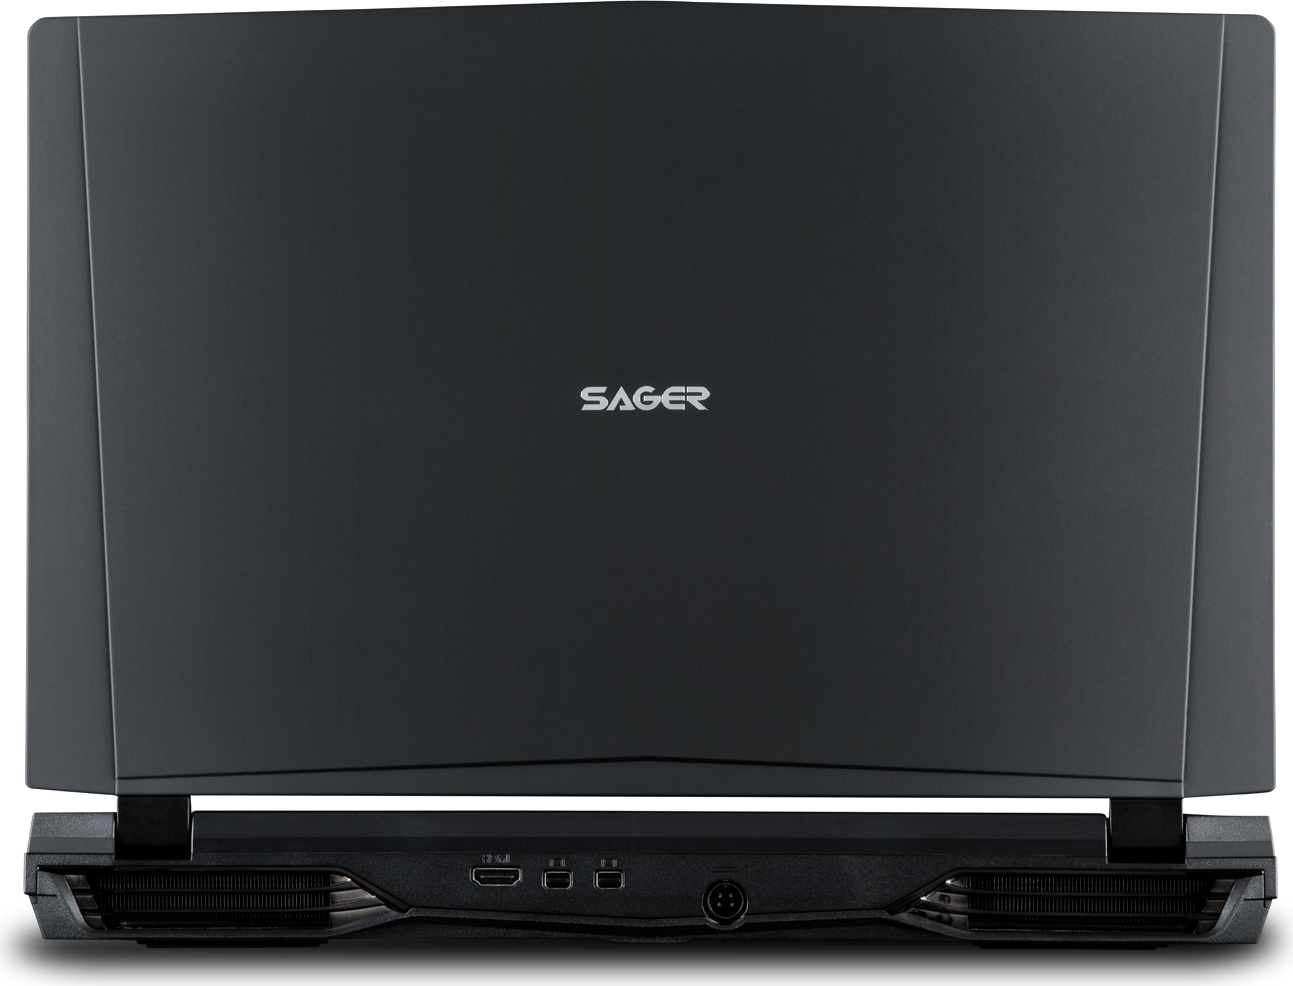 Sager NP9156 (CLEVO P750TM1-G)